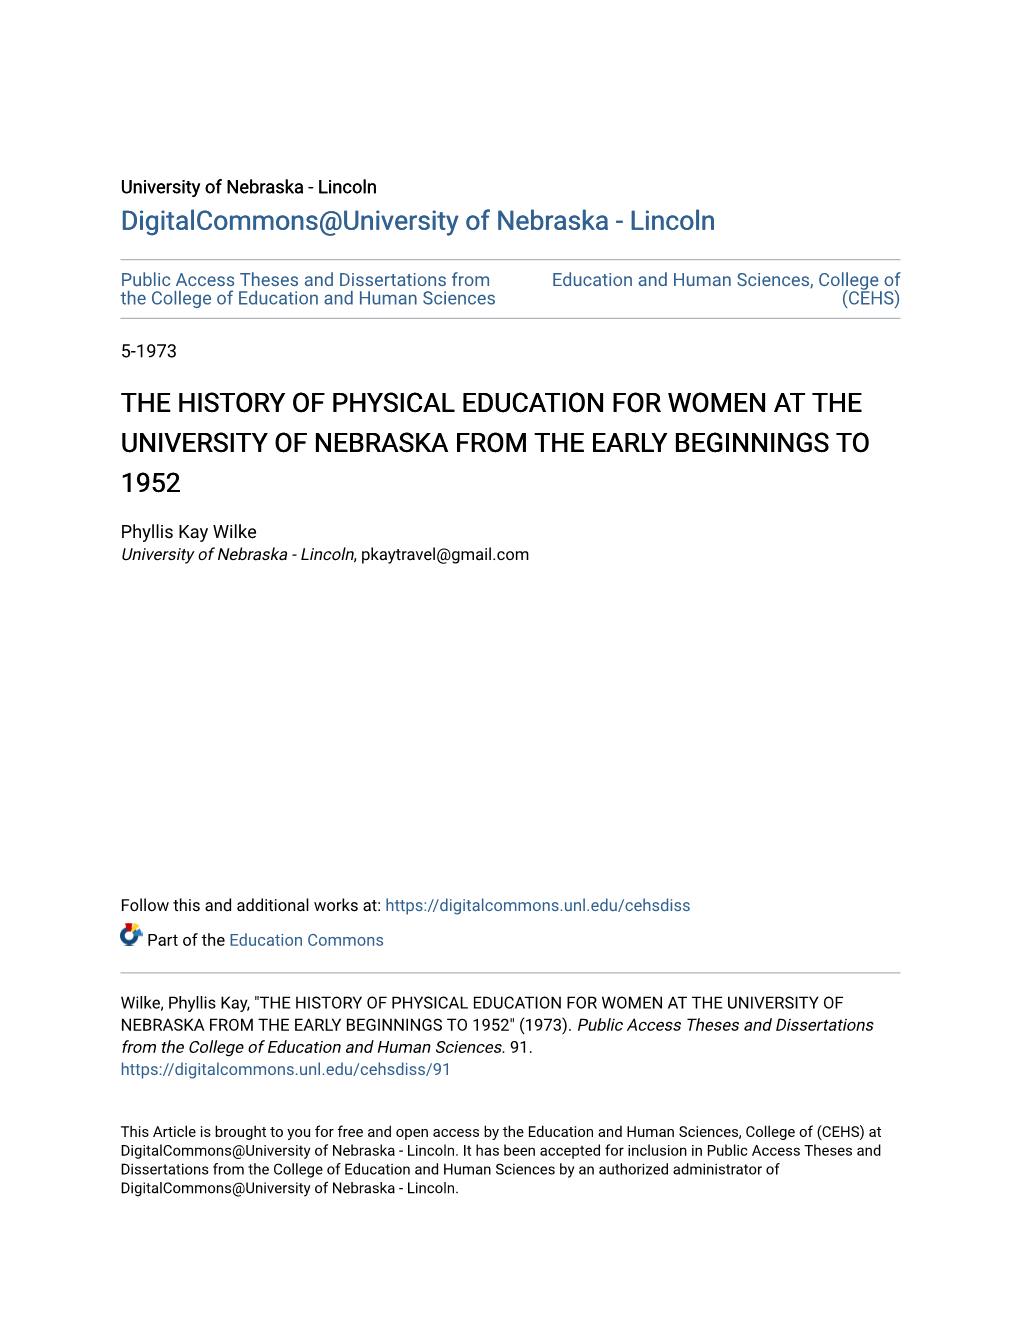 The History of Physical Education for Women at the University of Nebraska from the Early Beginnings to 1952